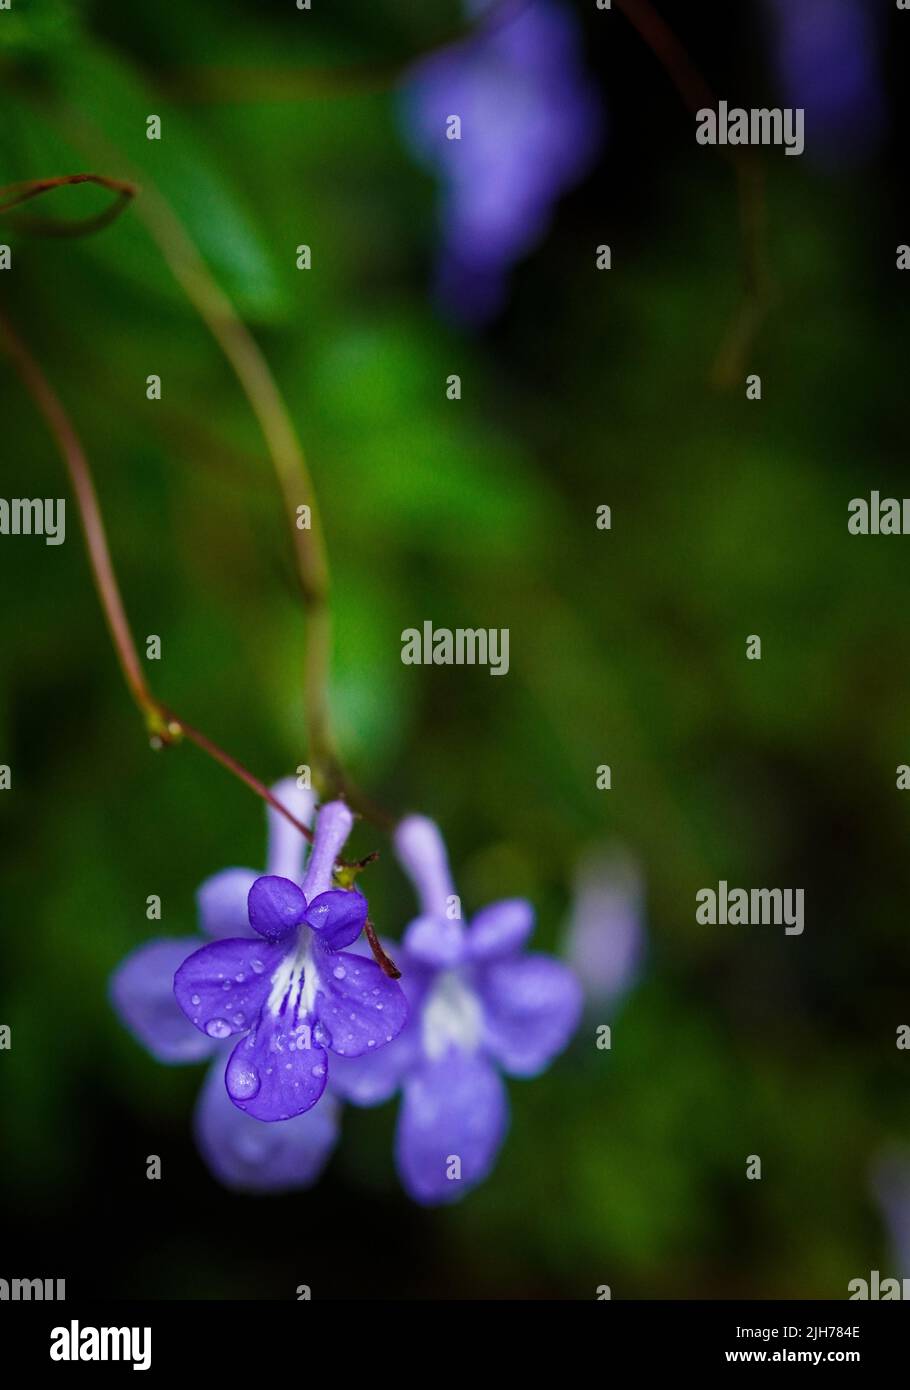 Image of purple flower, known as Melastomes, with blurry background and focus on the beautiful petals. Stock Photo